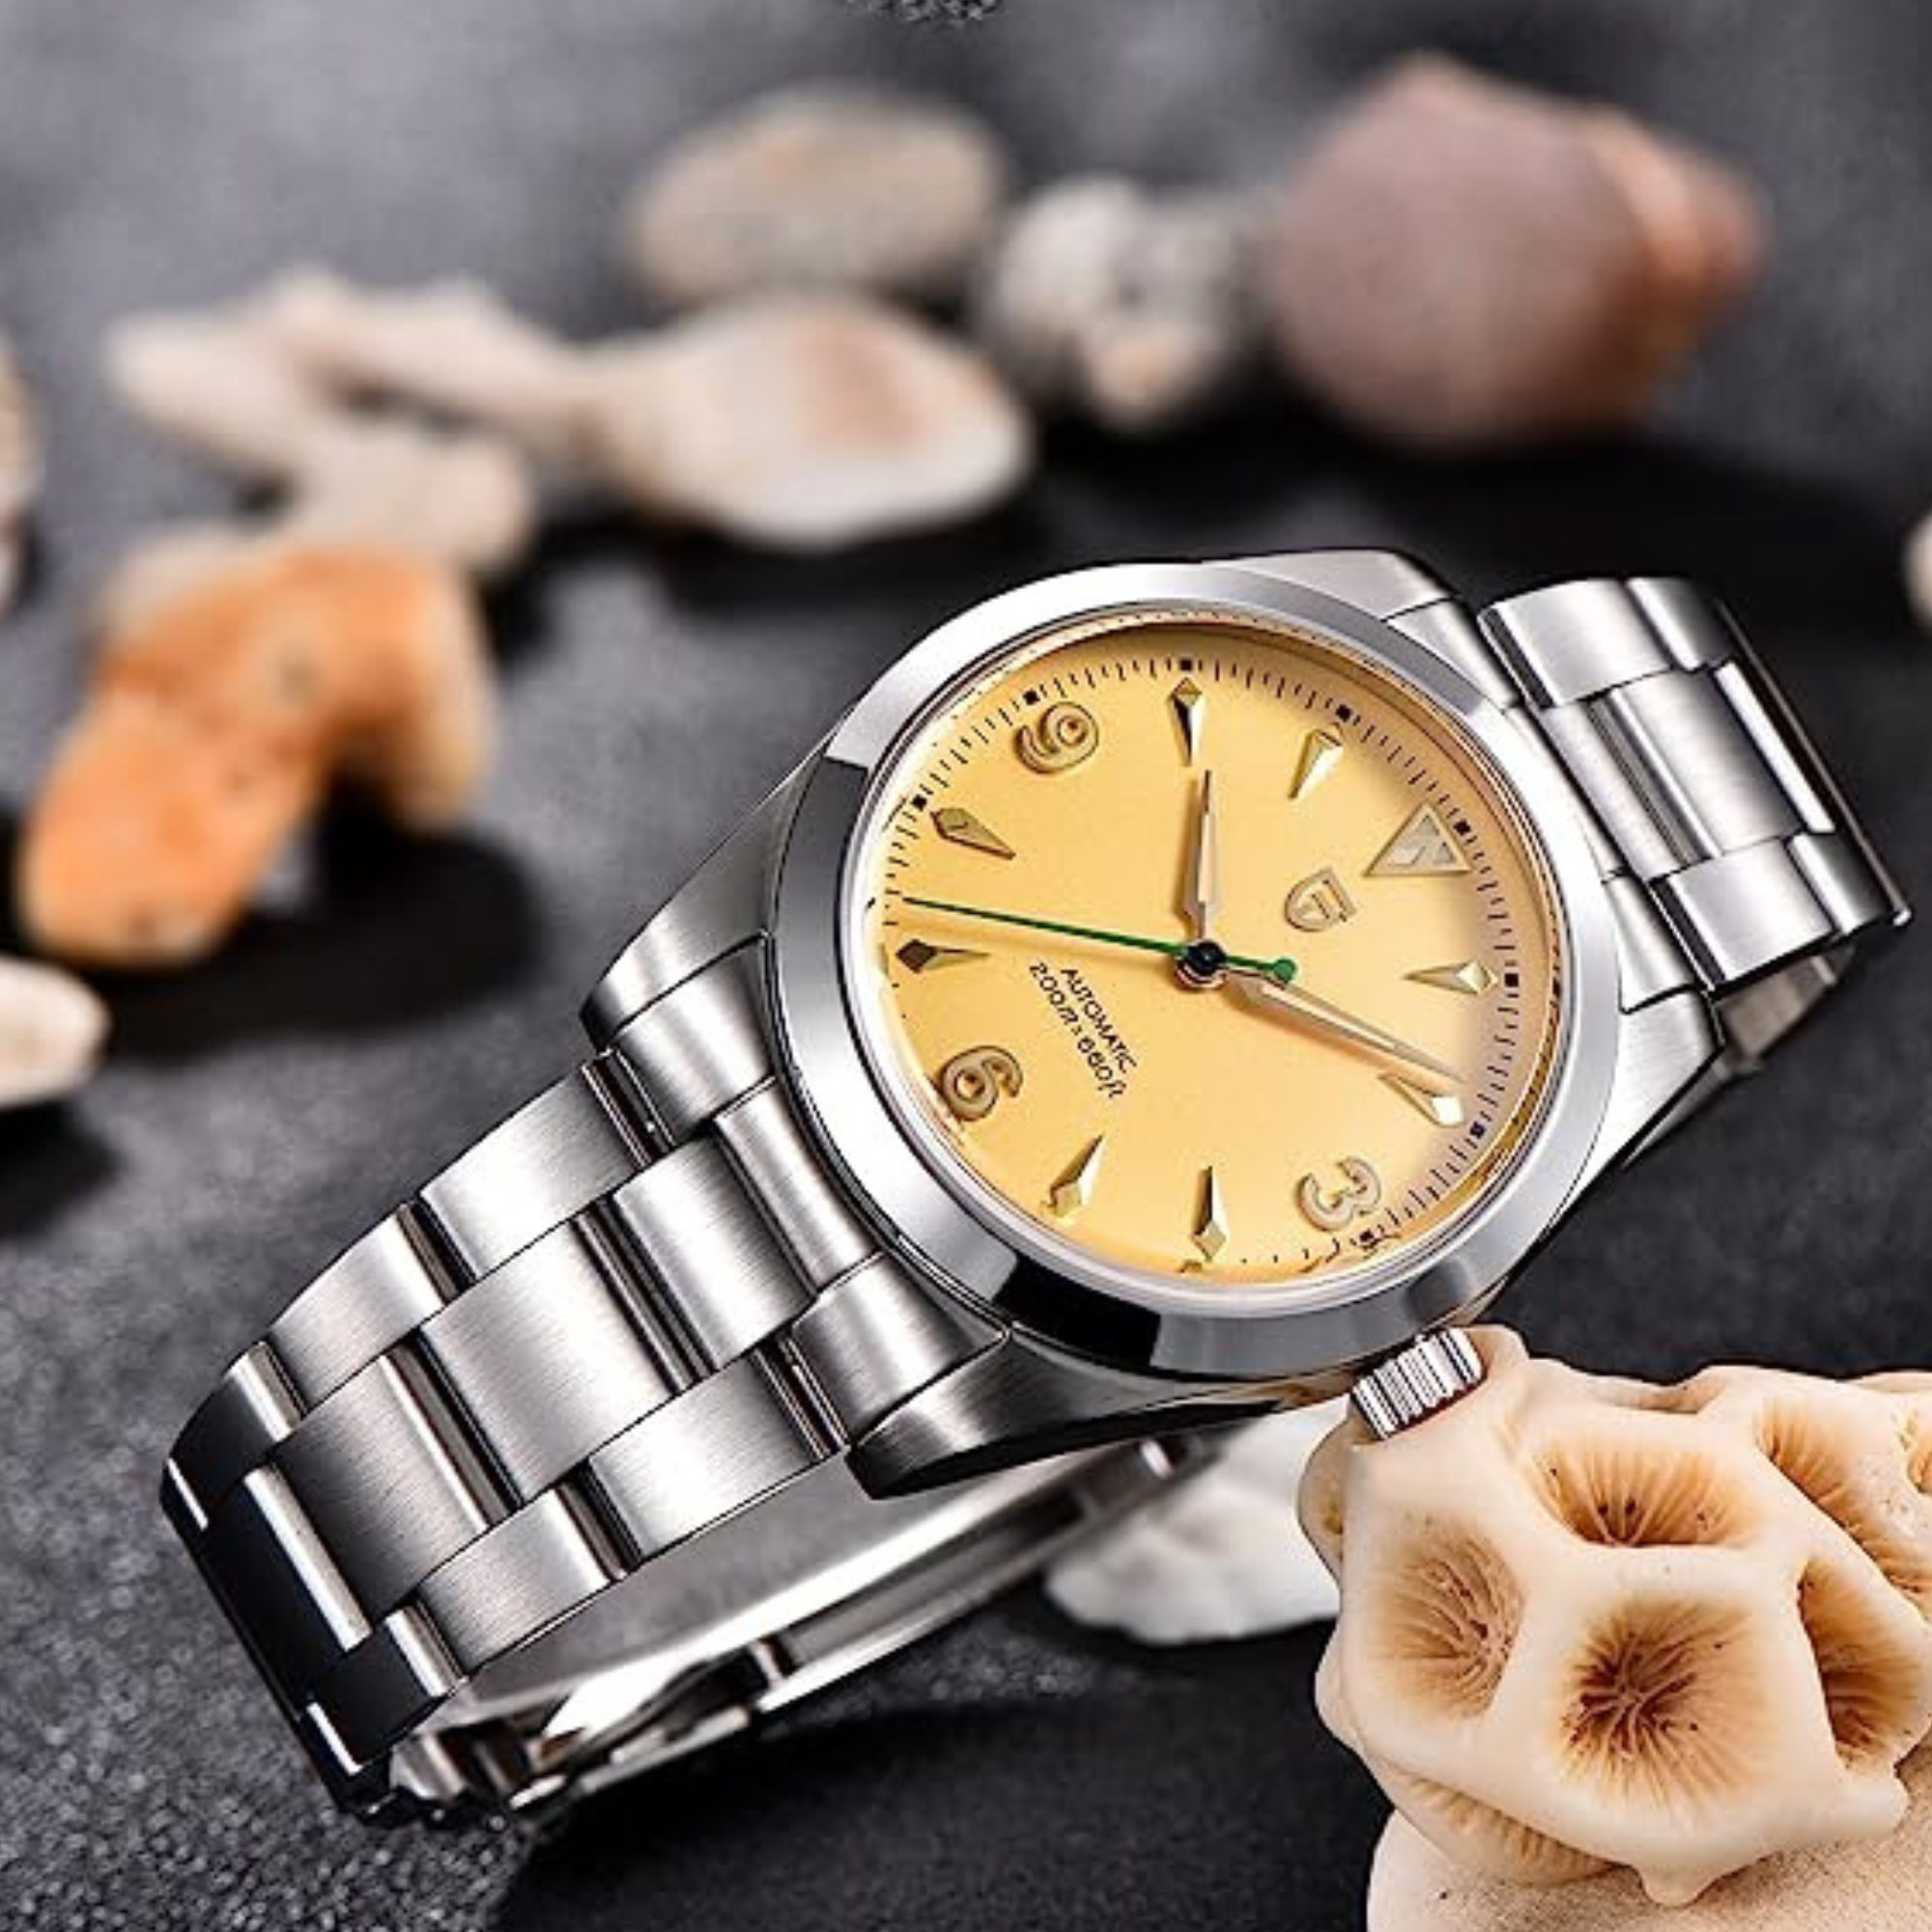 Business News: What Is The World's Most Valuable Watch Brand? - Hodinkee